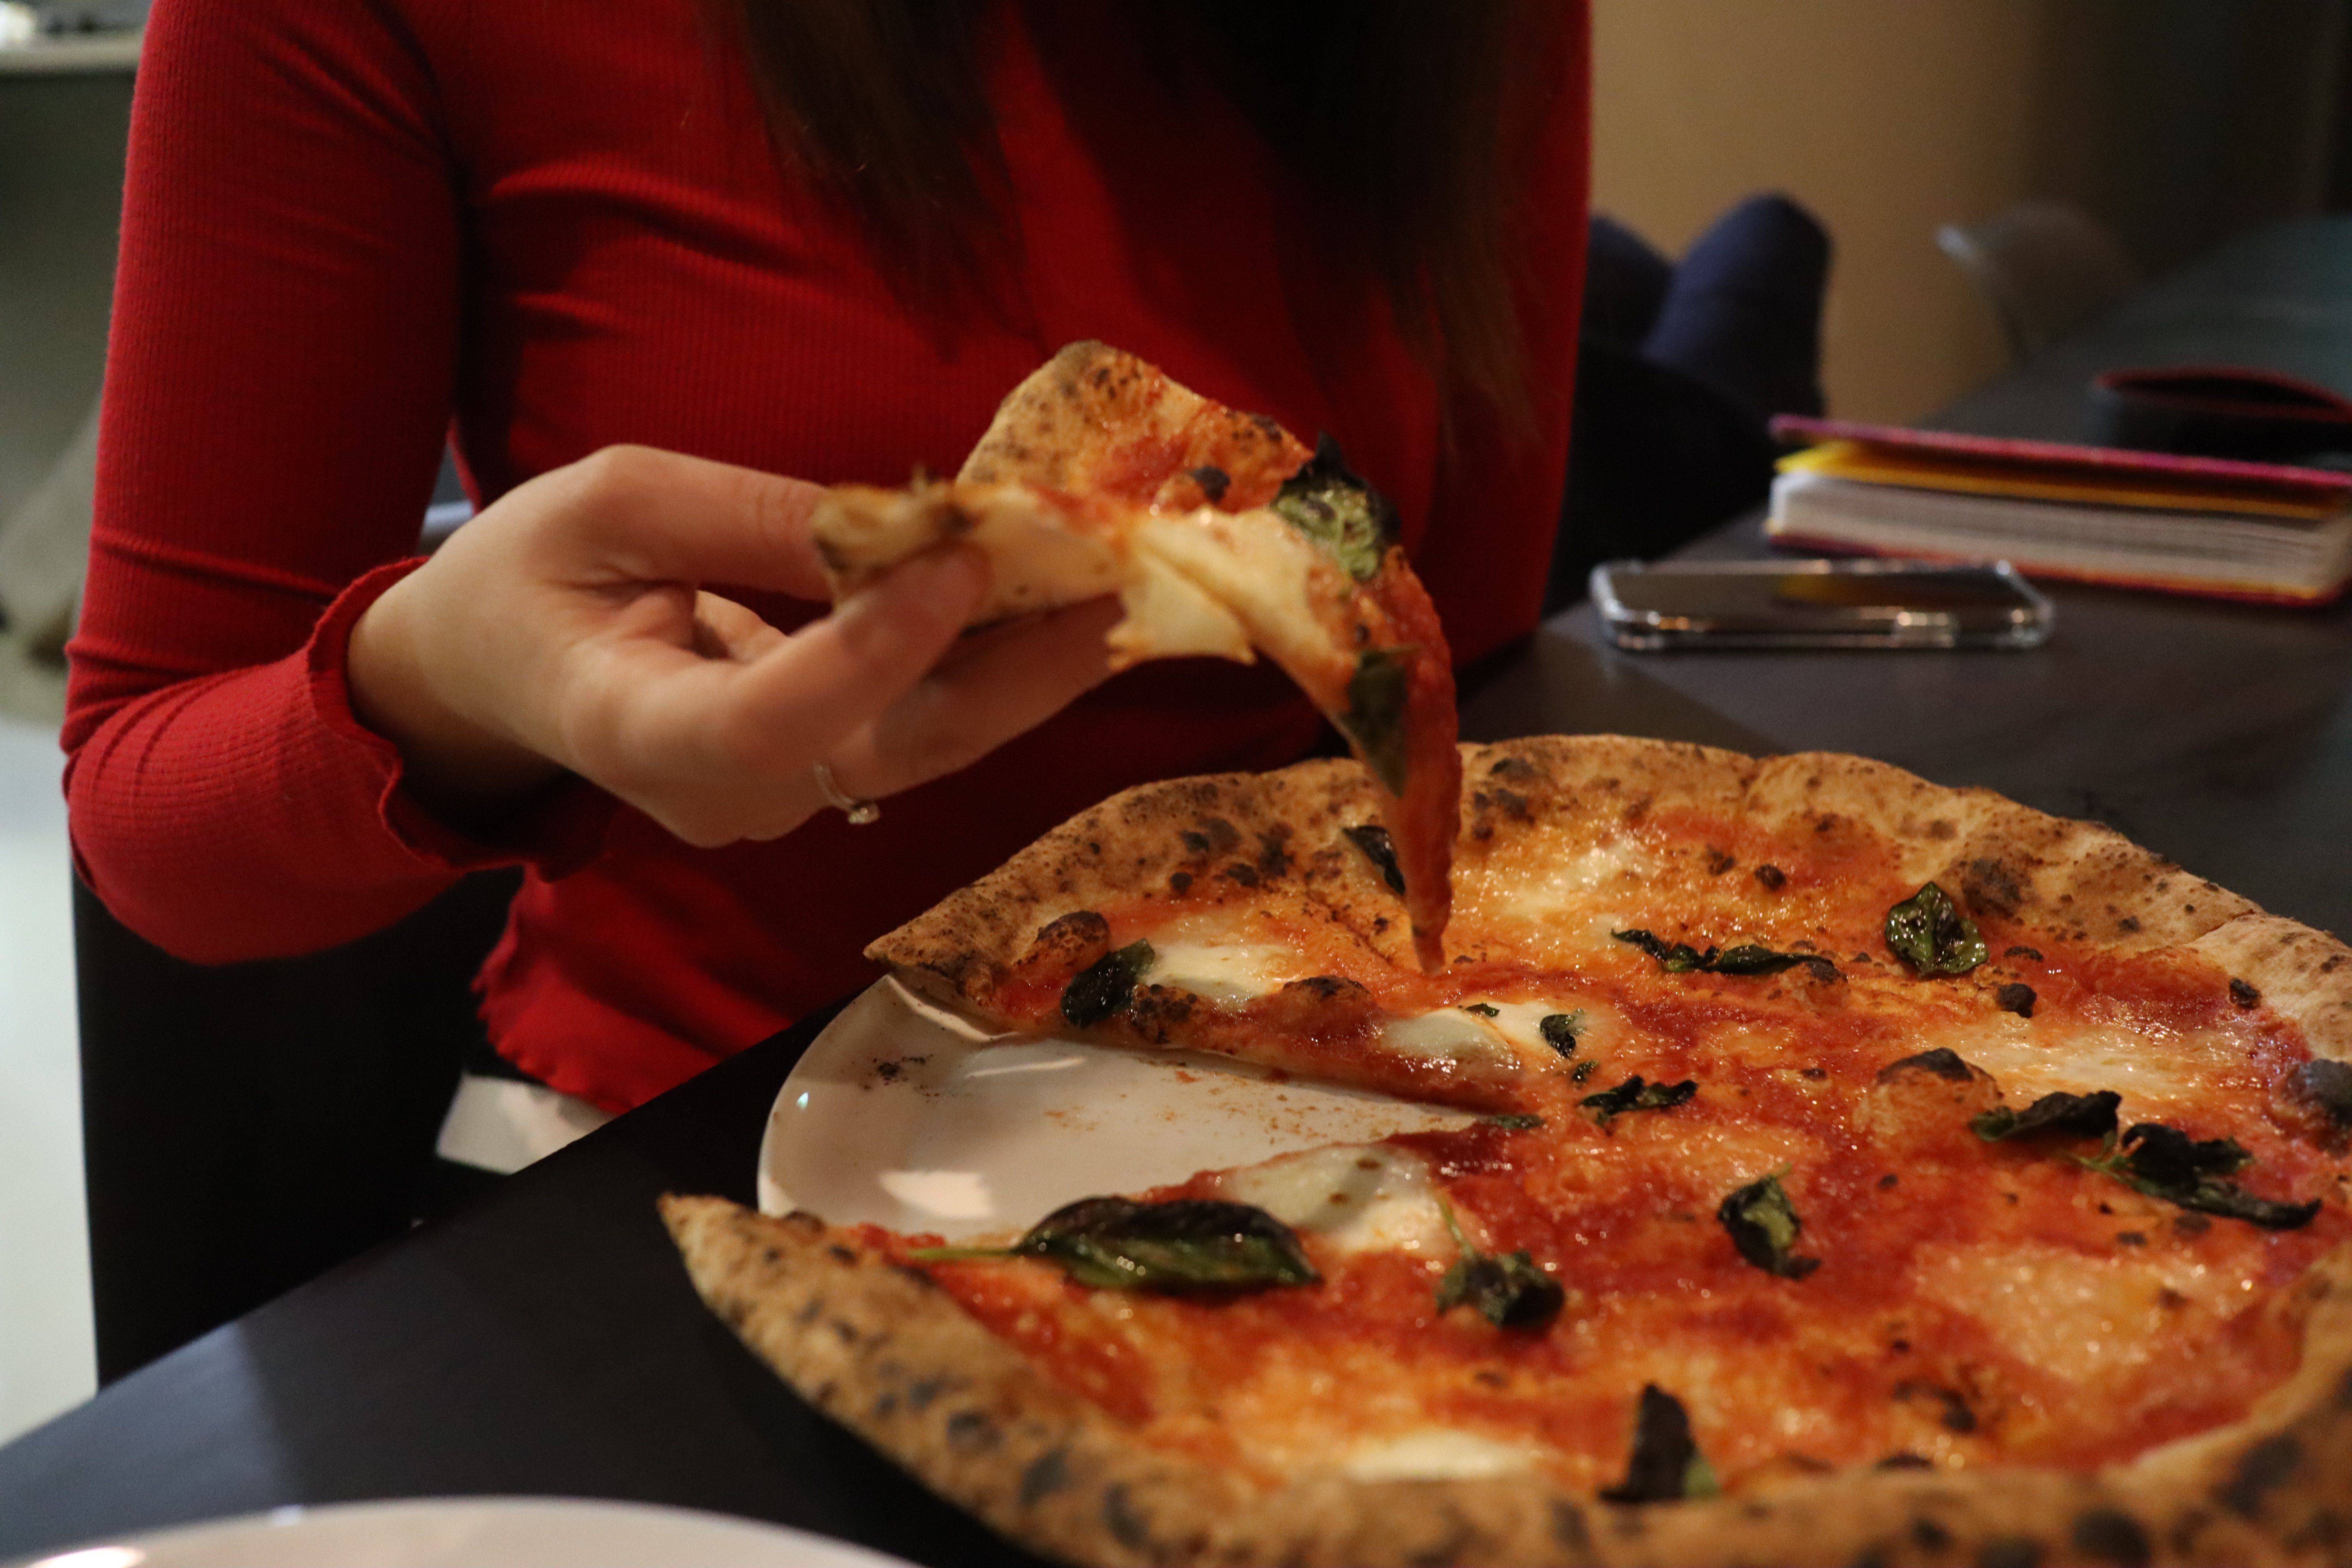 No need to go to Italy: Serving up Traditional, Neapolitan Pizzas in Macquarie